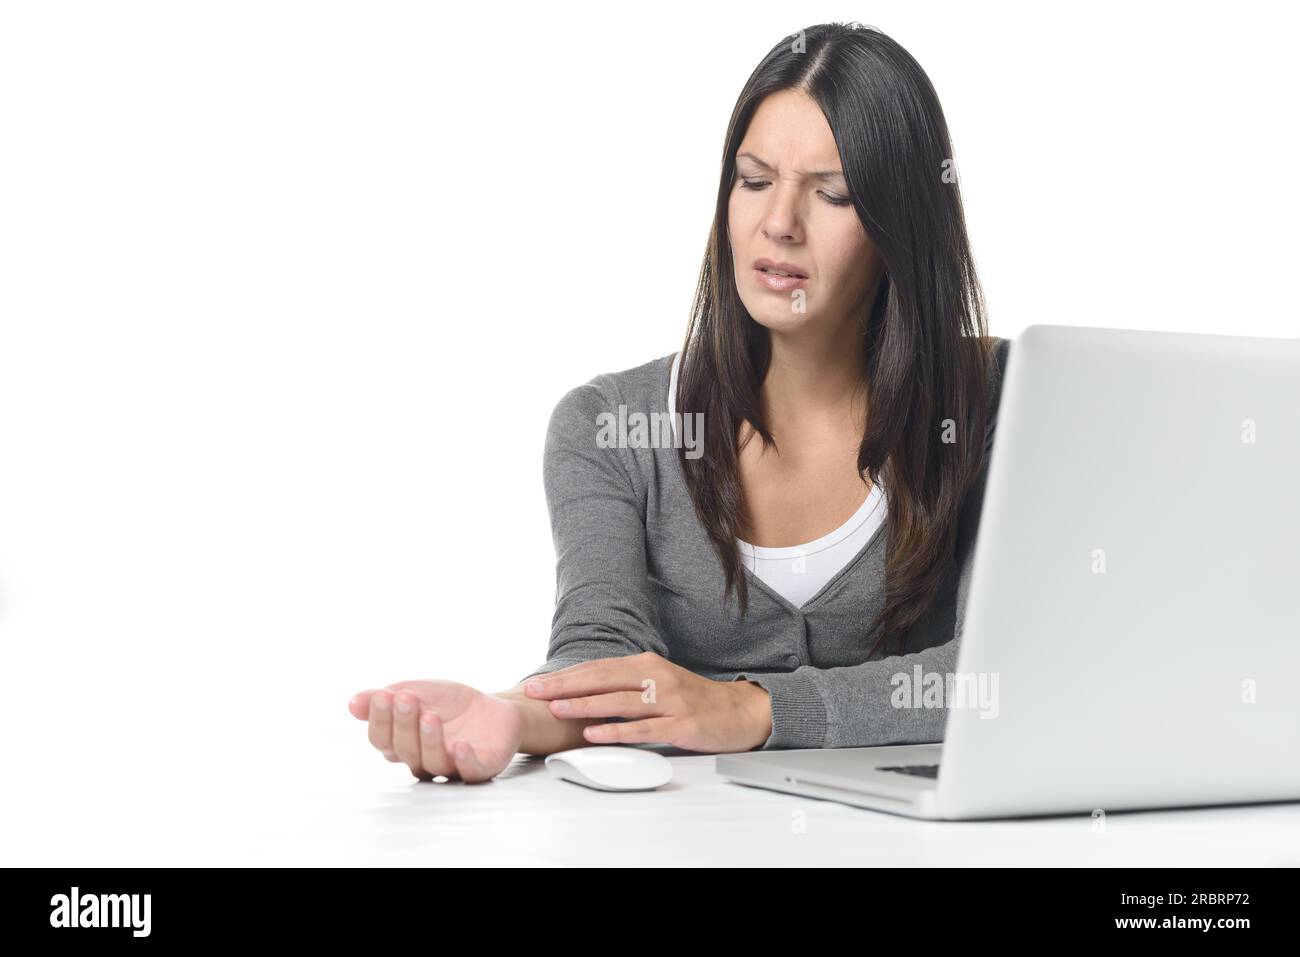 Young businesswoman rubbing and massaging her wrist to relieve cramps after using a computer mouse for too long at a stretch, on white Stock Photo